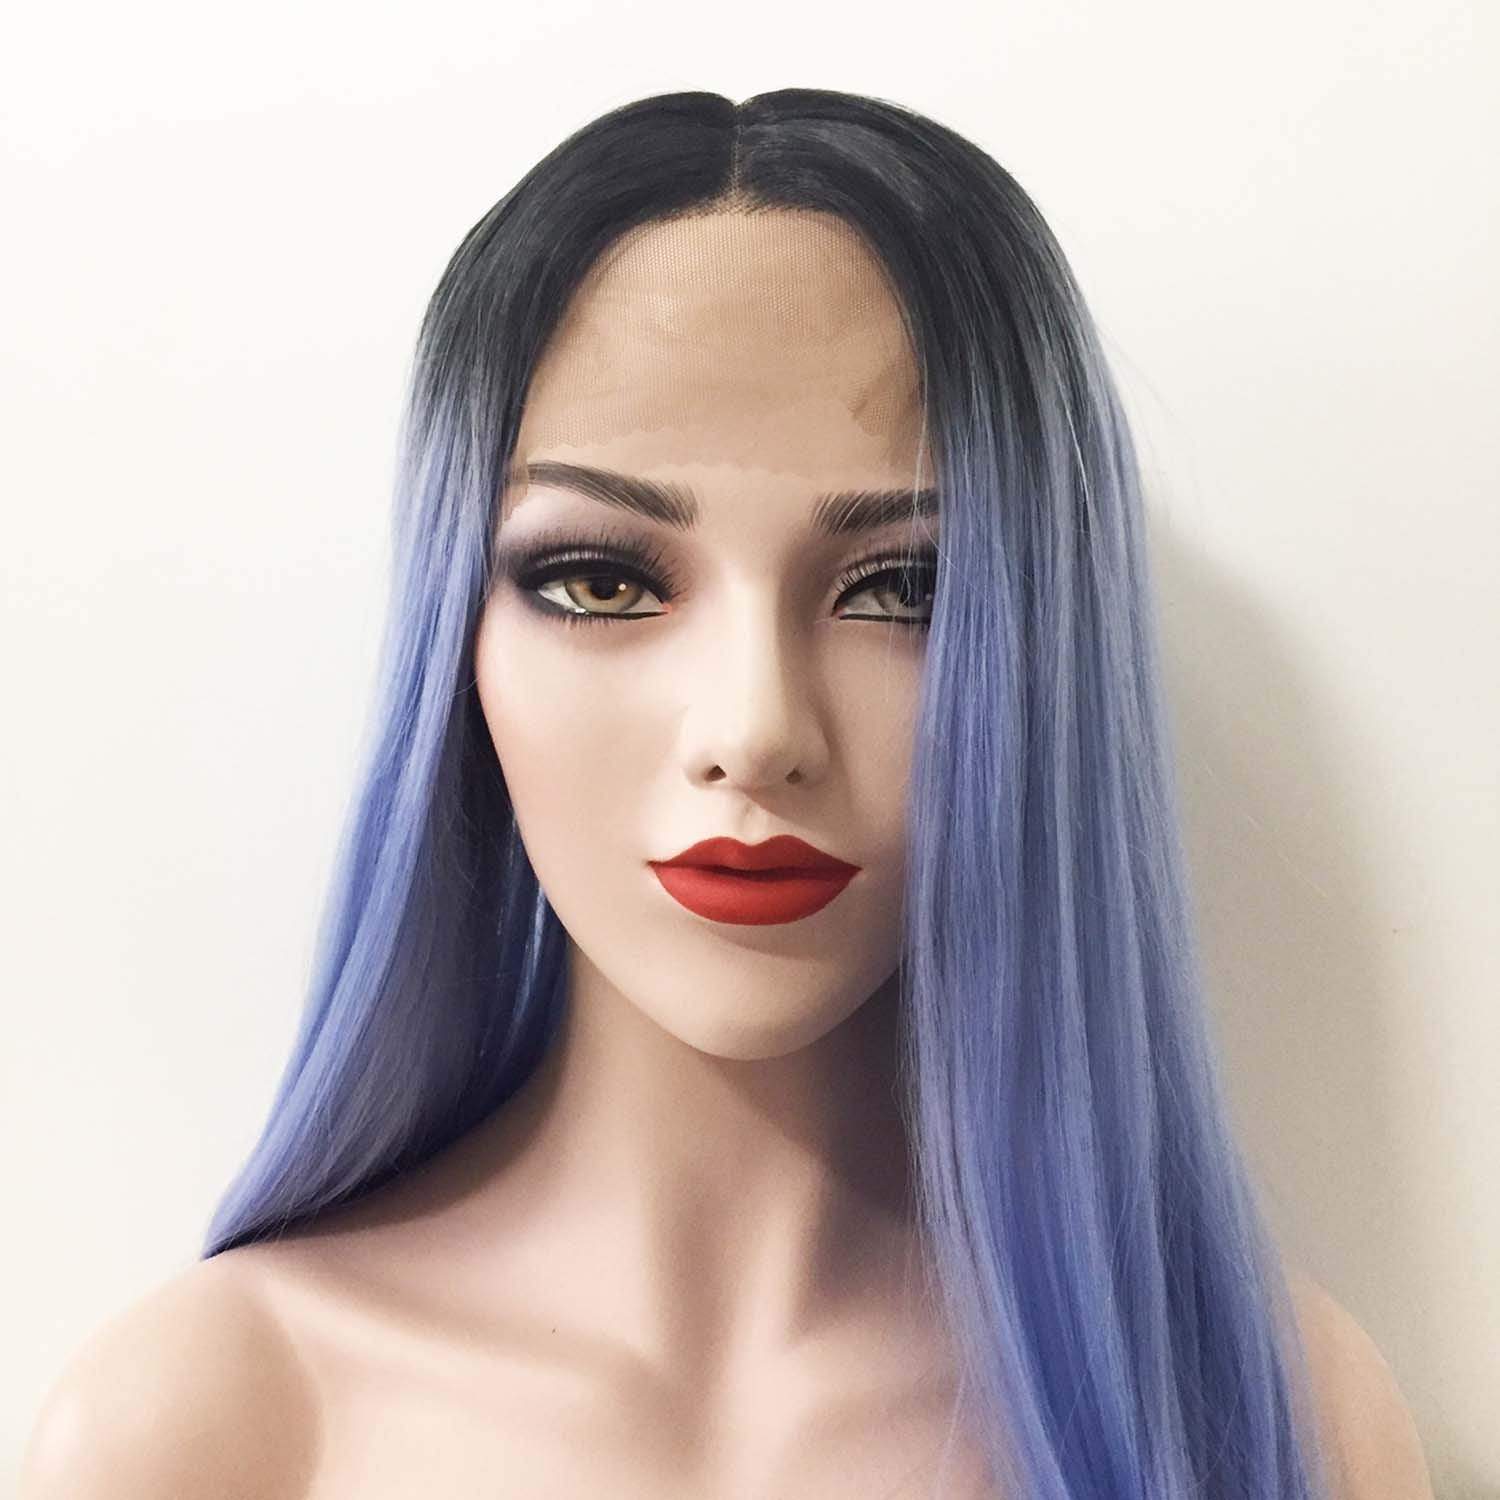 nevermindyrhead Women Lace Front Ombre Light Blue Dark Root Black Middle Part Long Hair Wig